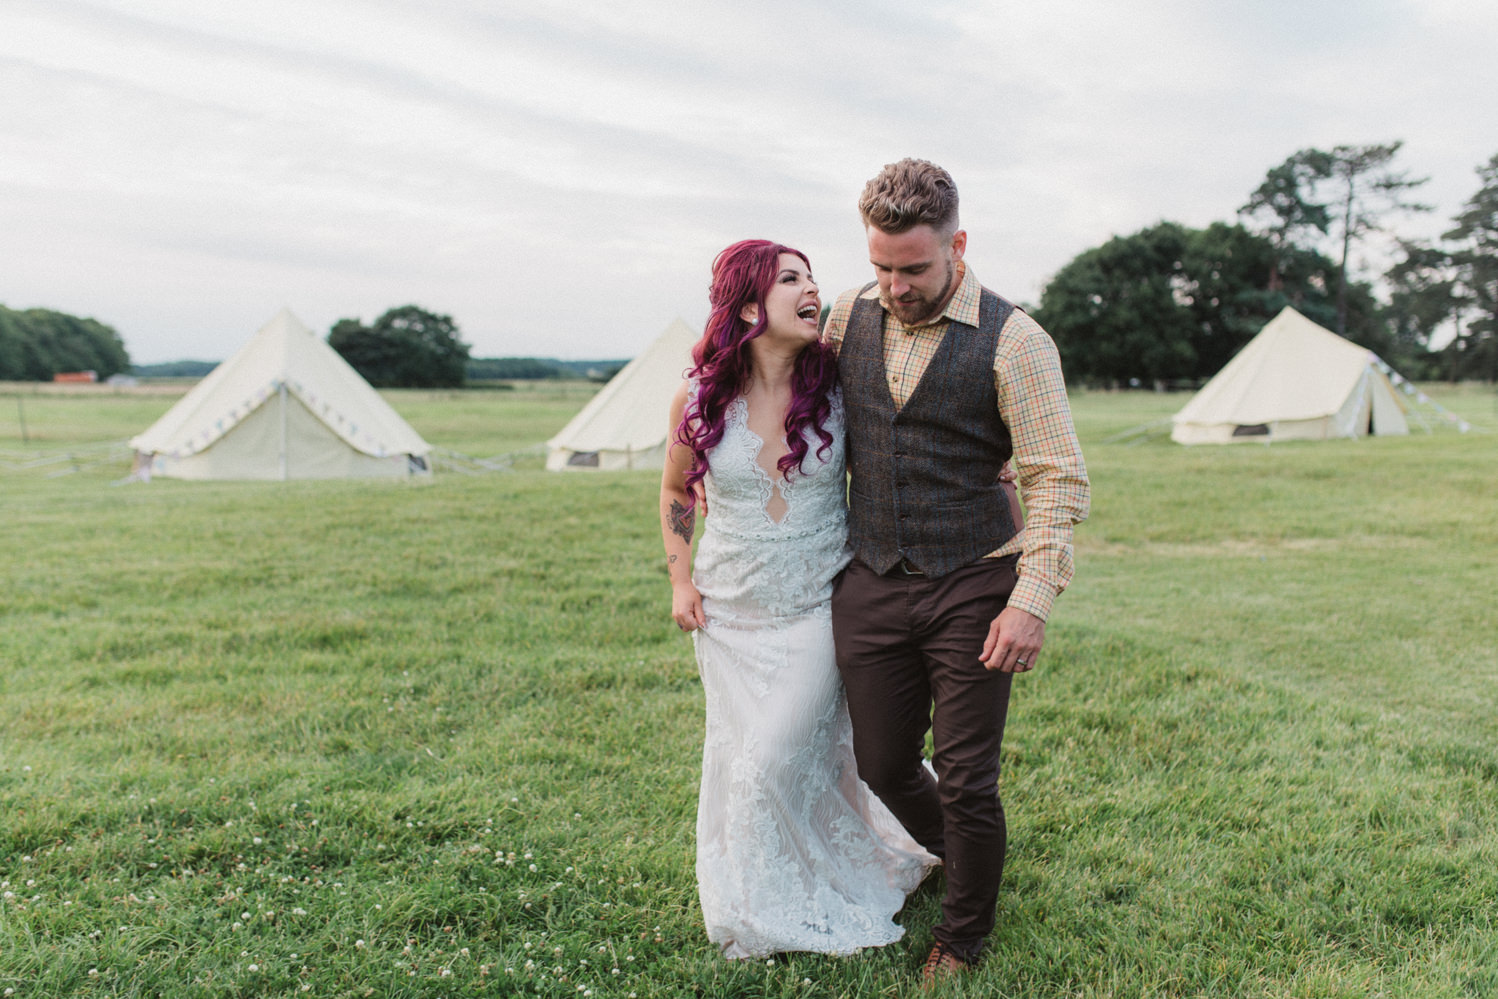 relaxed wedding photography at colourful festival wedding at godwick great barn norfolk